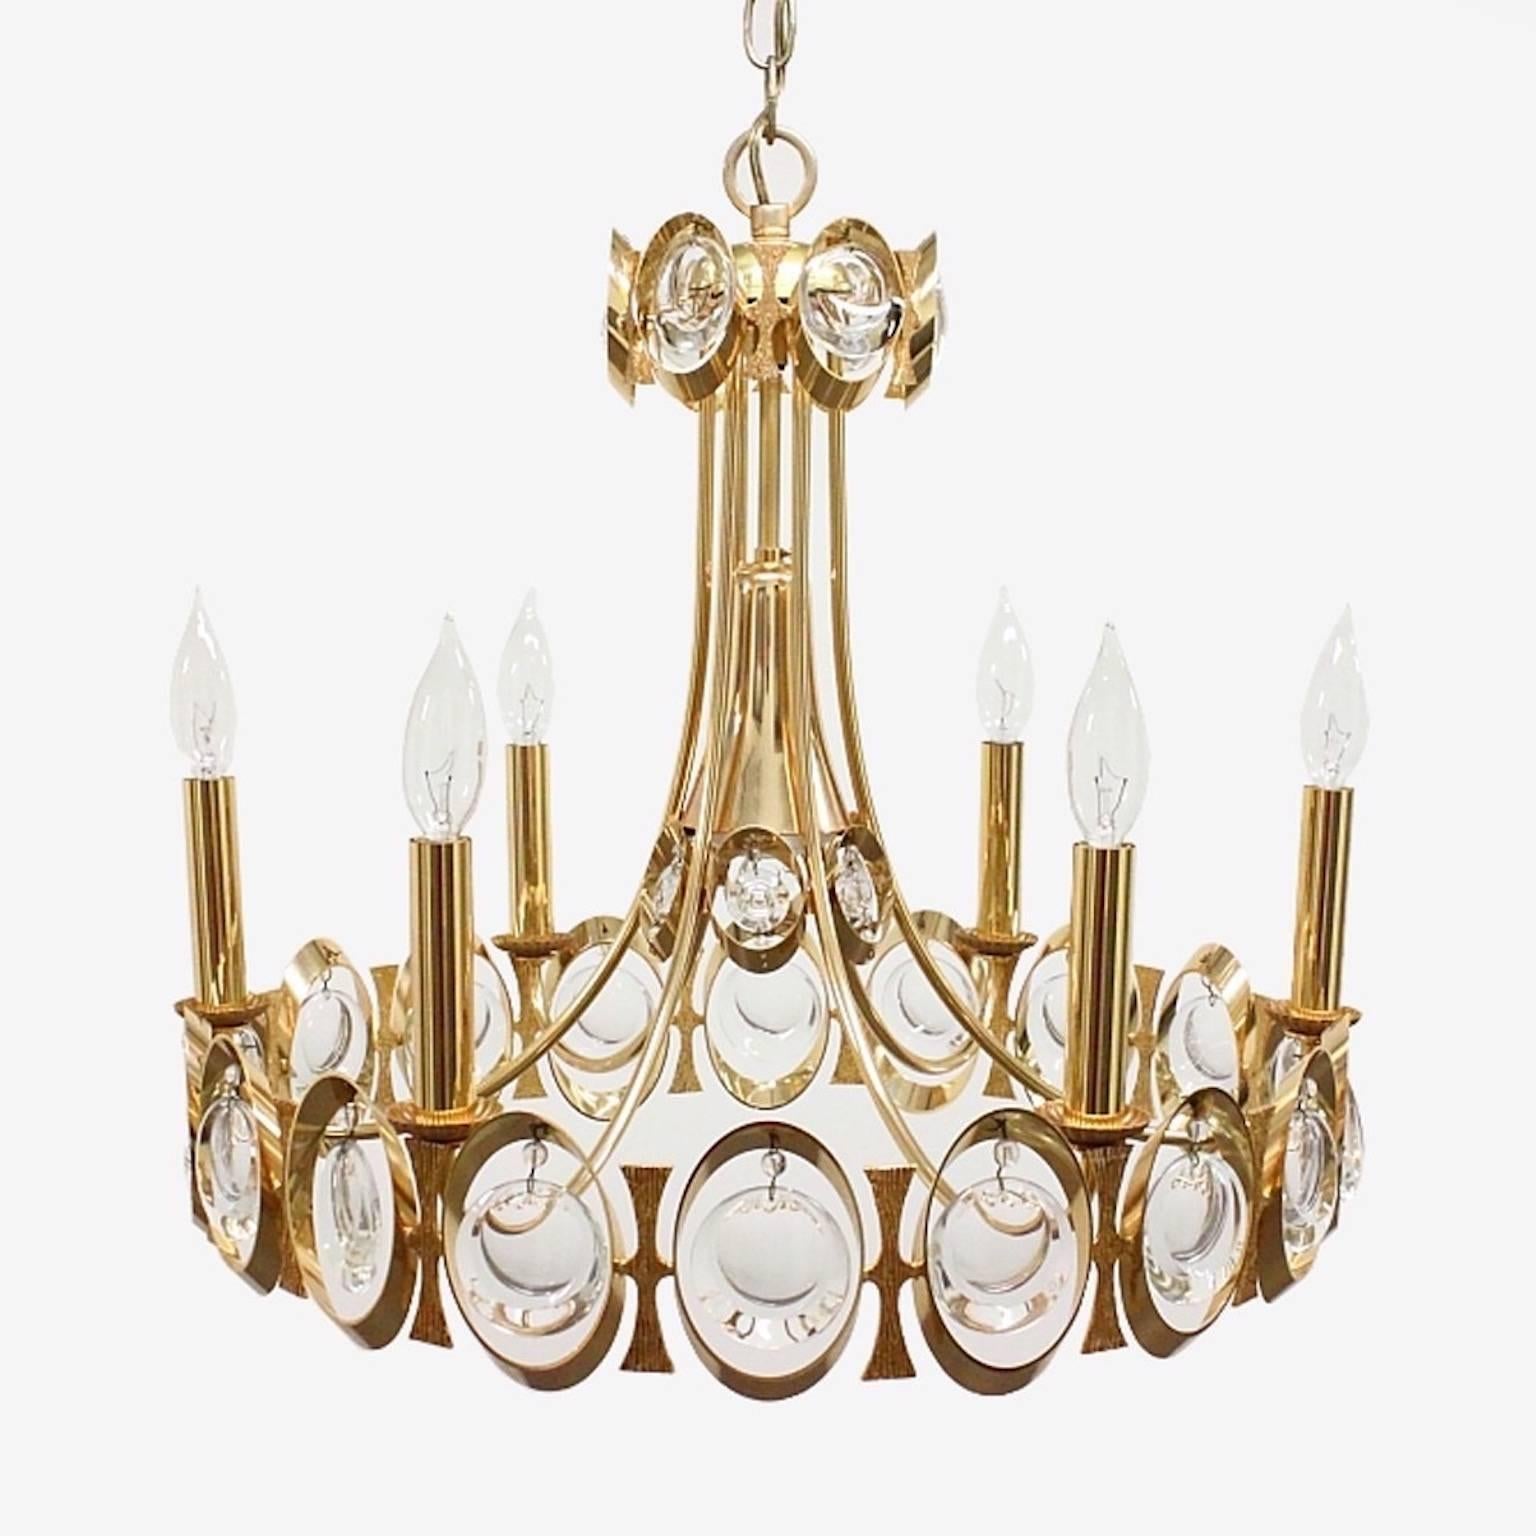 Vintage glamorous 1960s chandelier by Palwa of Germany. Round venturi shaped with interlinked gilt brass oval rings in which dangle the wheel ground optic lens prism crystals. 
This chandelier has six candle lights (up to 60 watts each) and a single